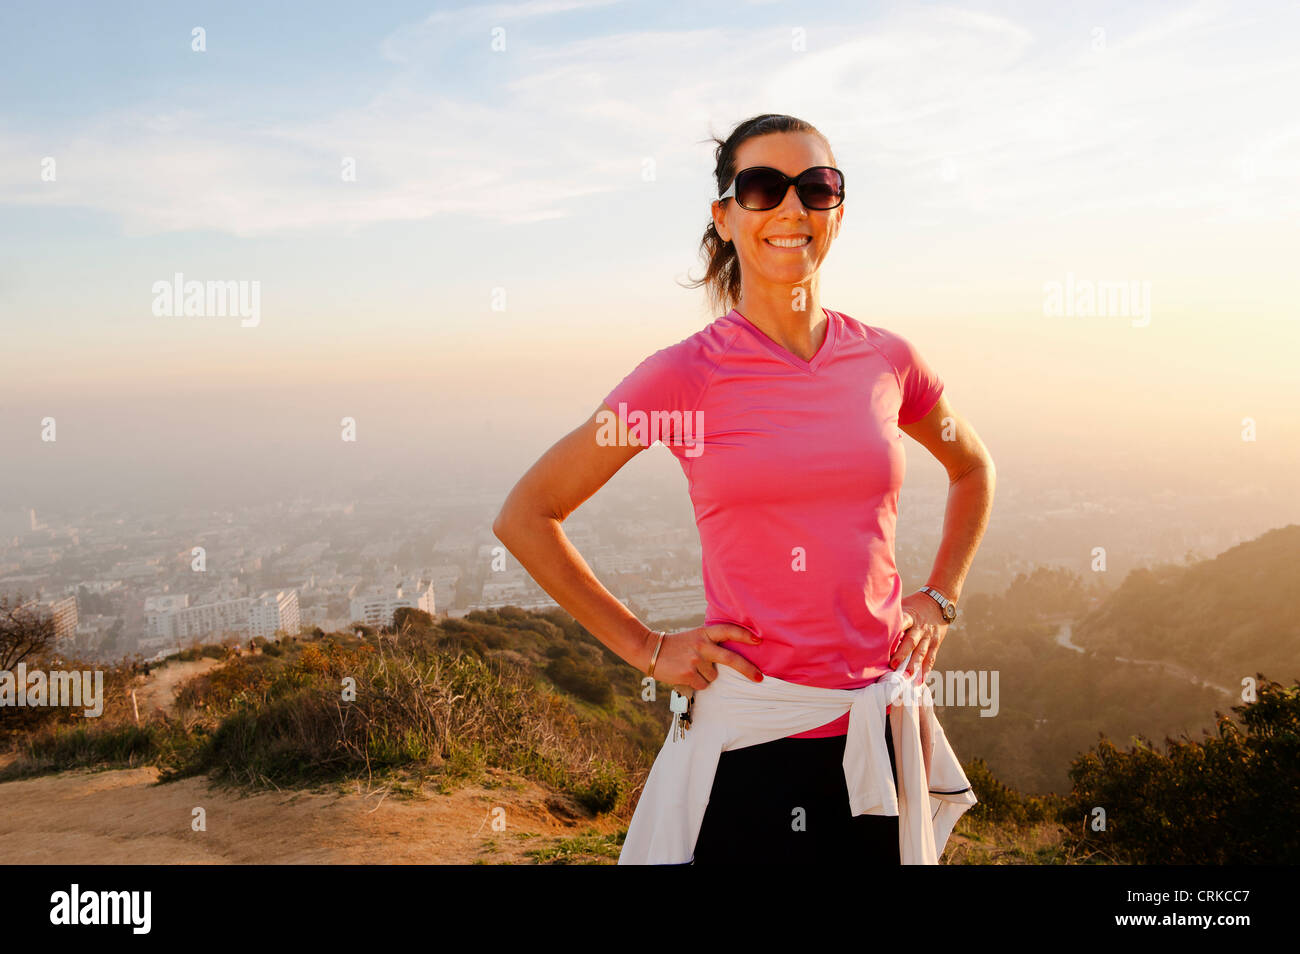 Smiling woman standing on hilltop Stock Photo